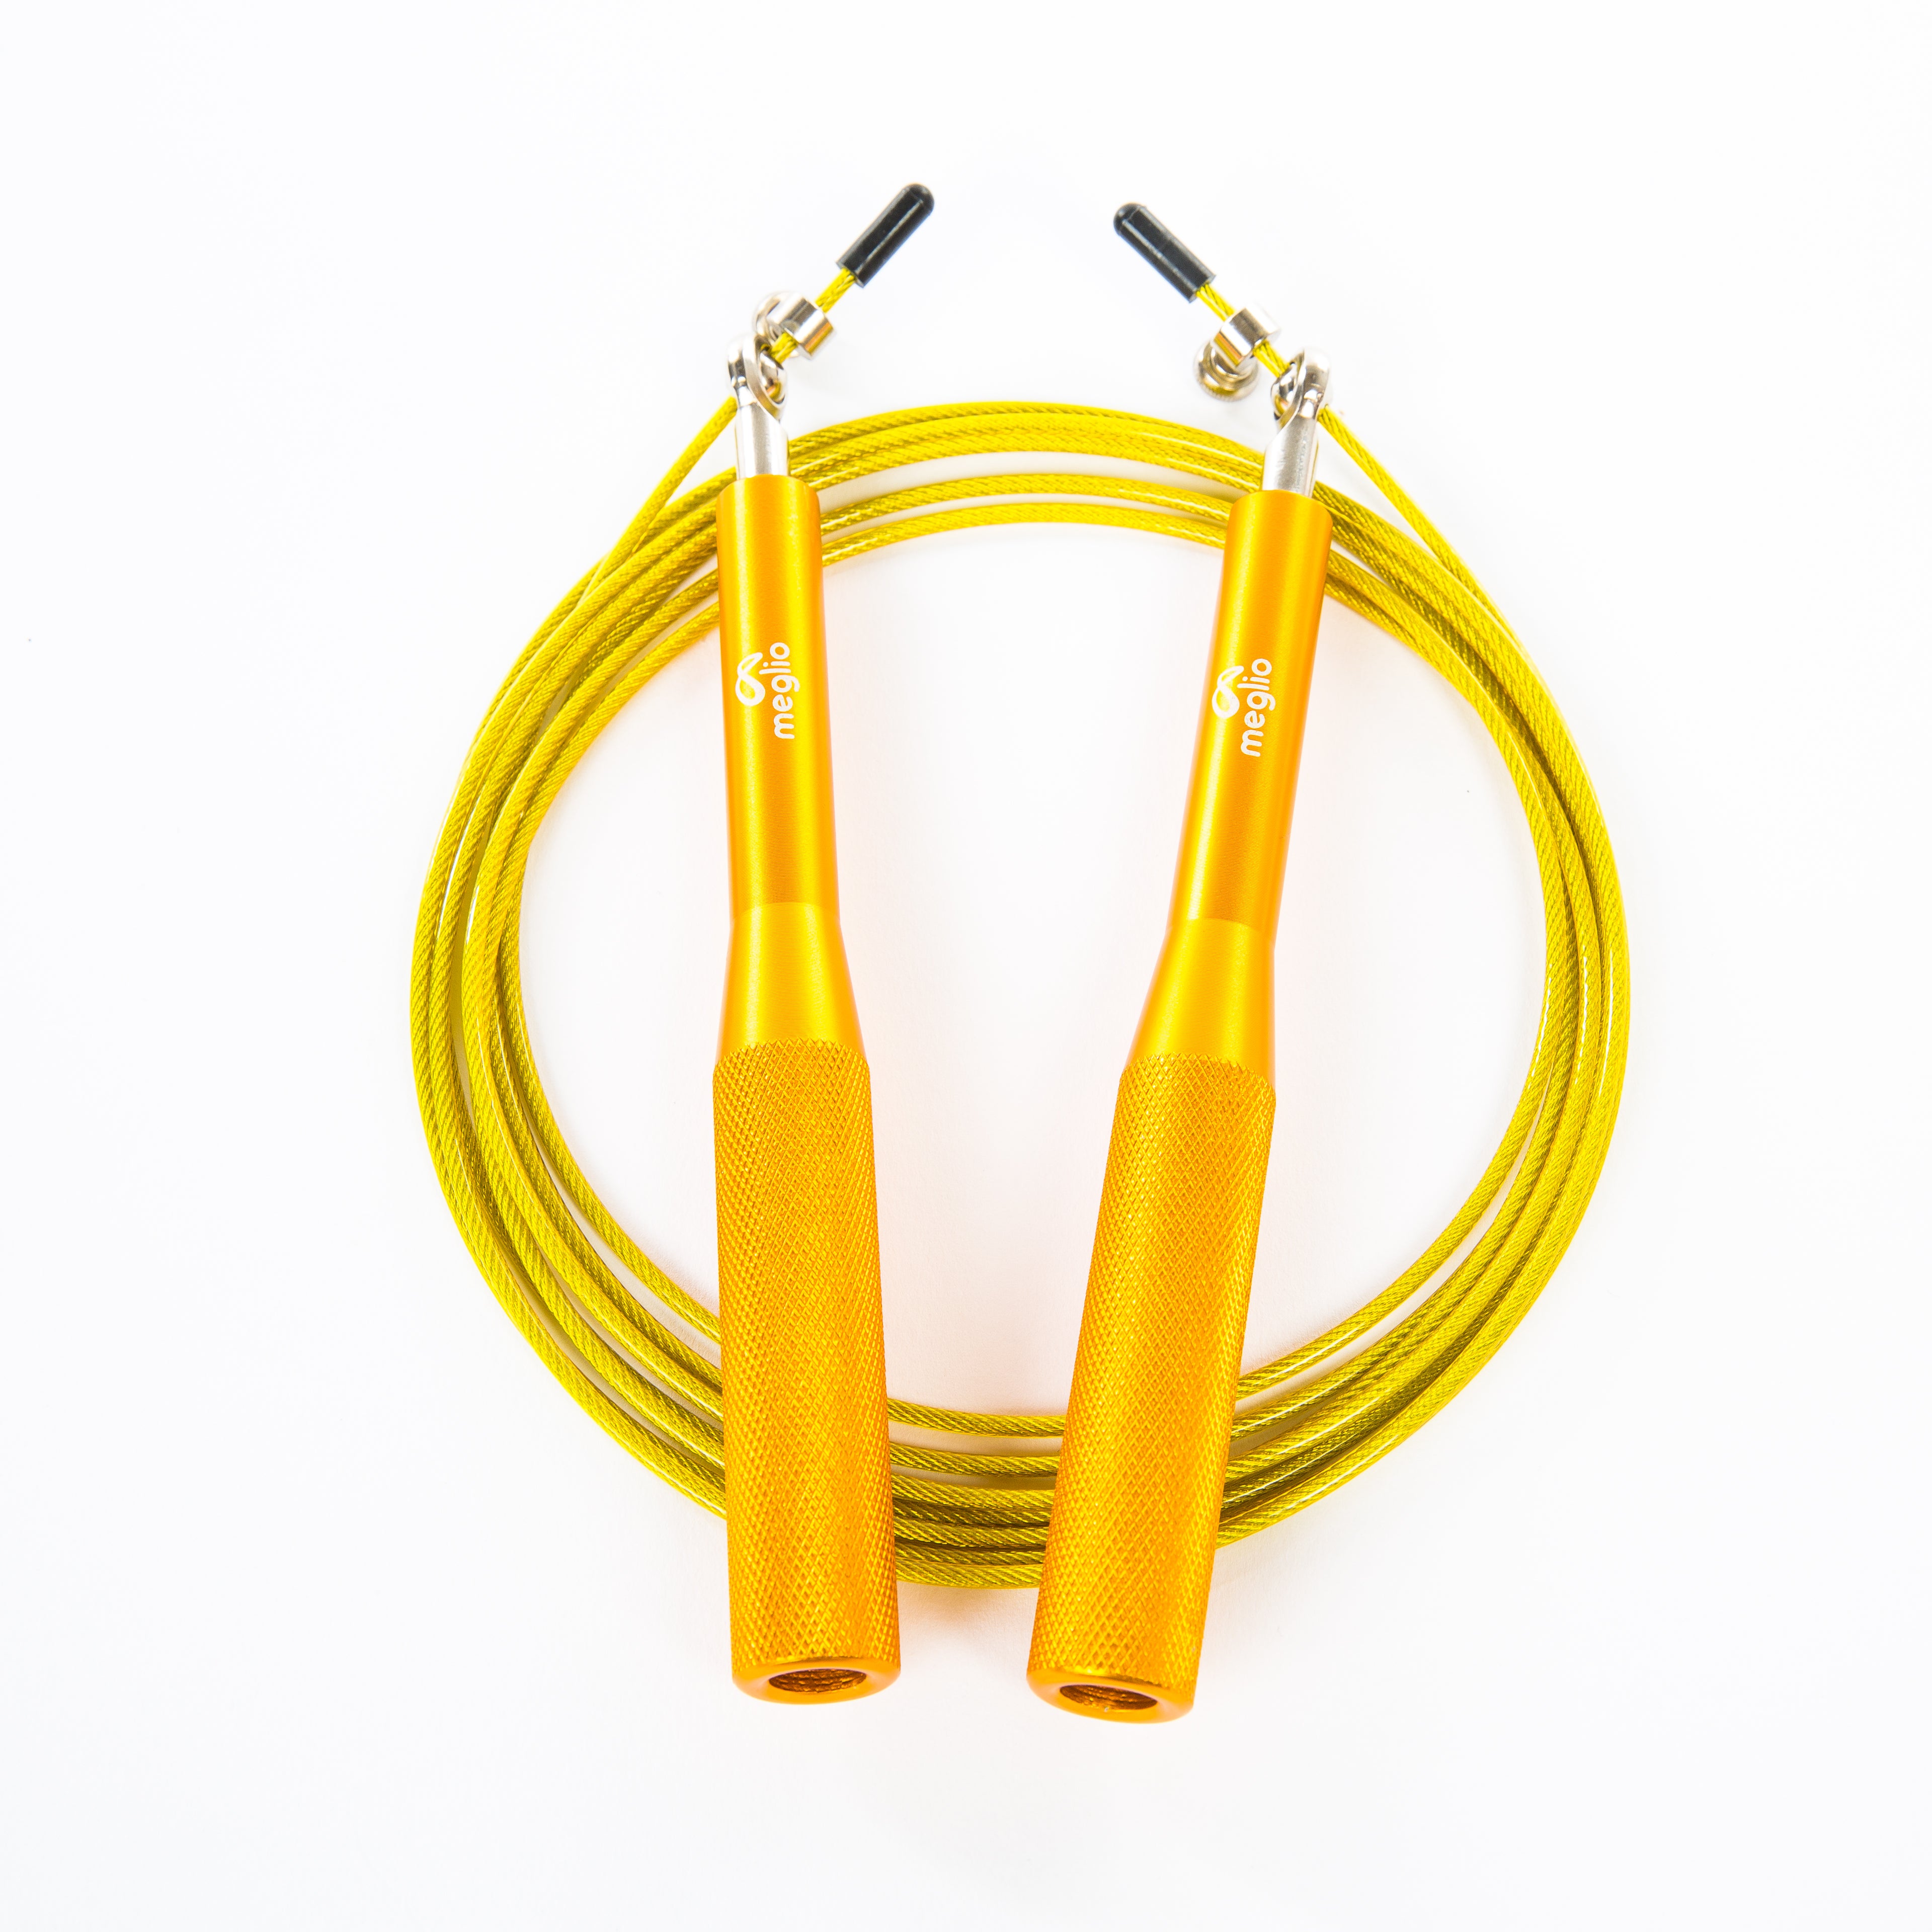 Details about   High Quality Skipping Rope Jumping Speed Weight Loss Exercise Girls Fitness UK 